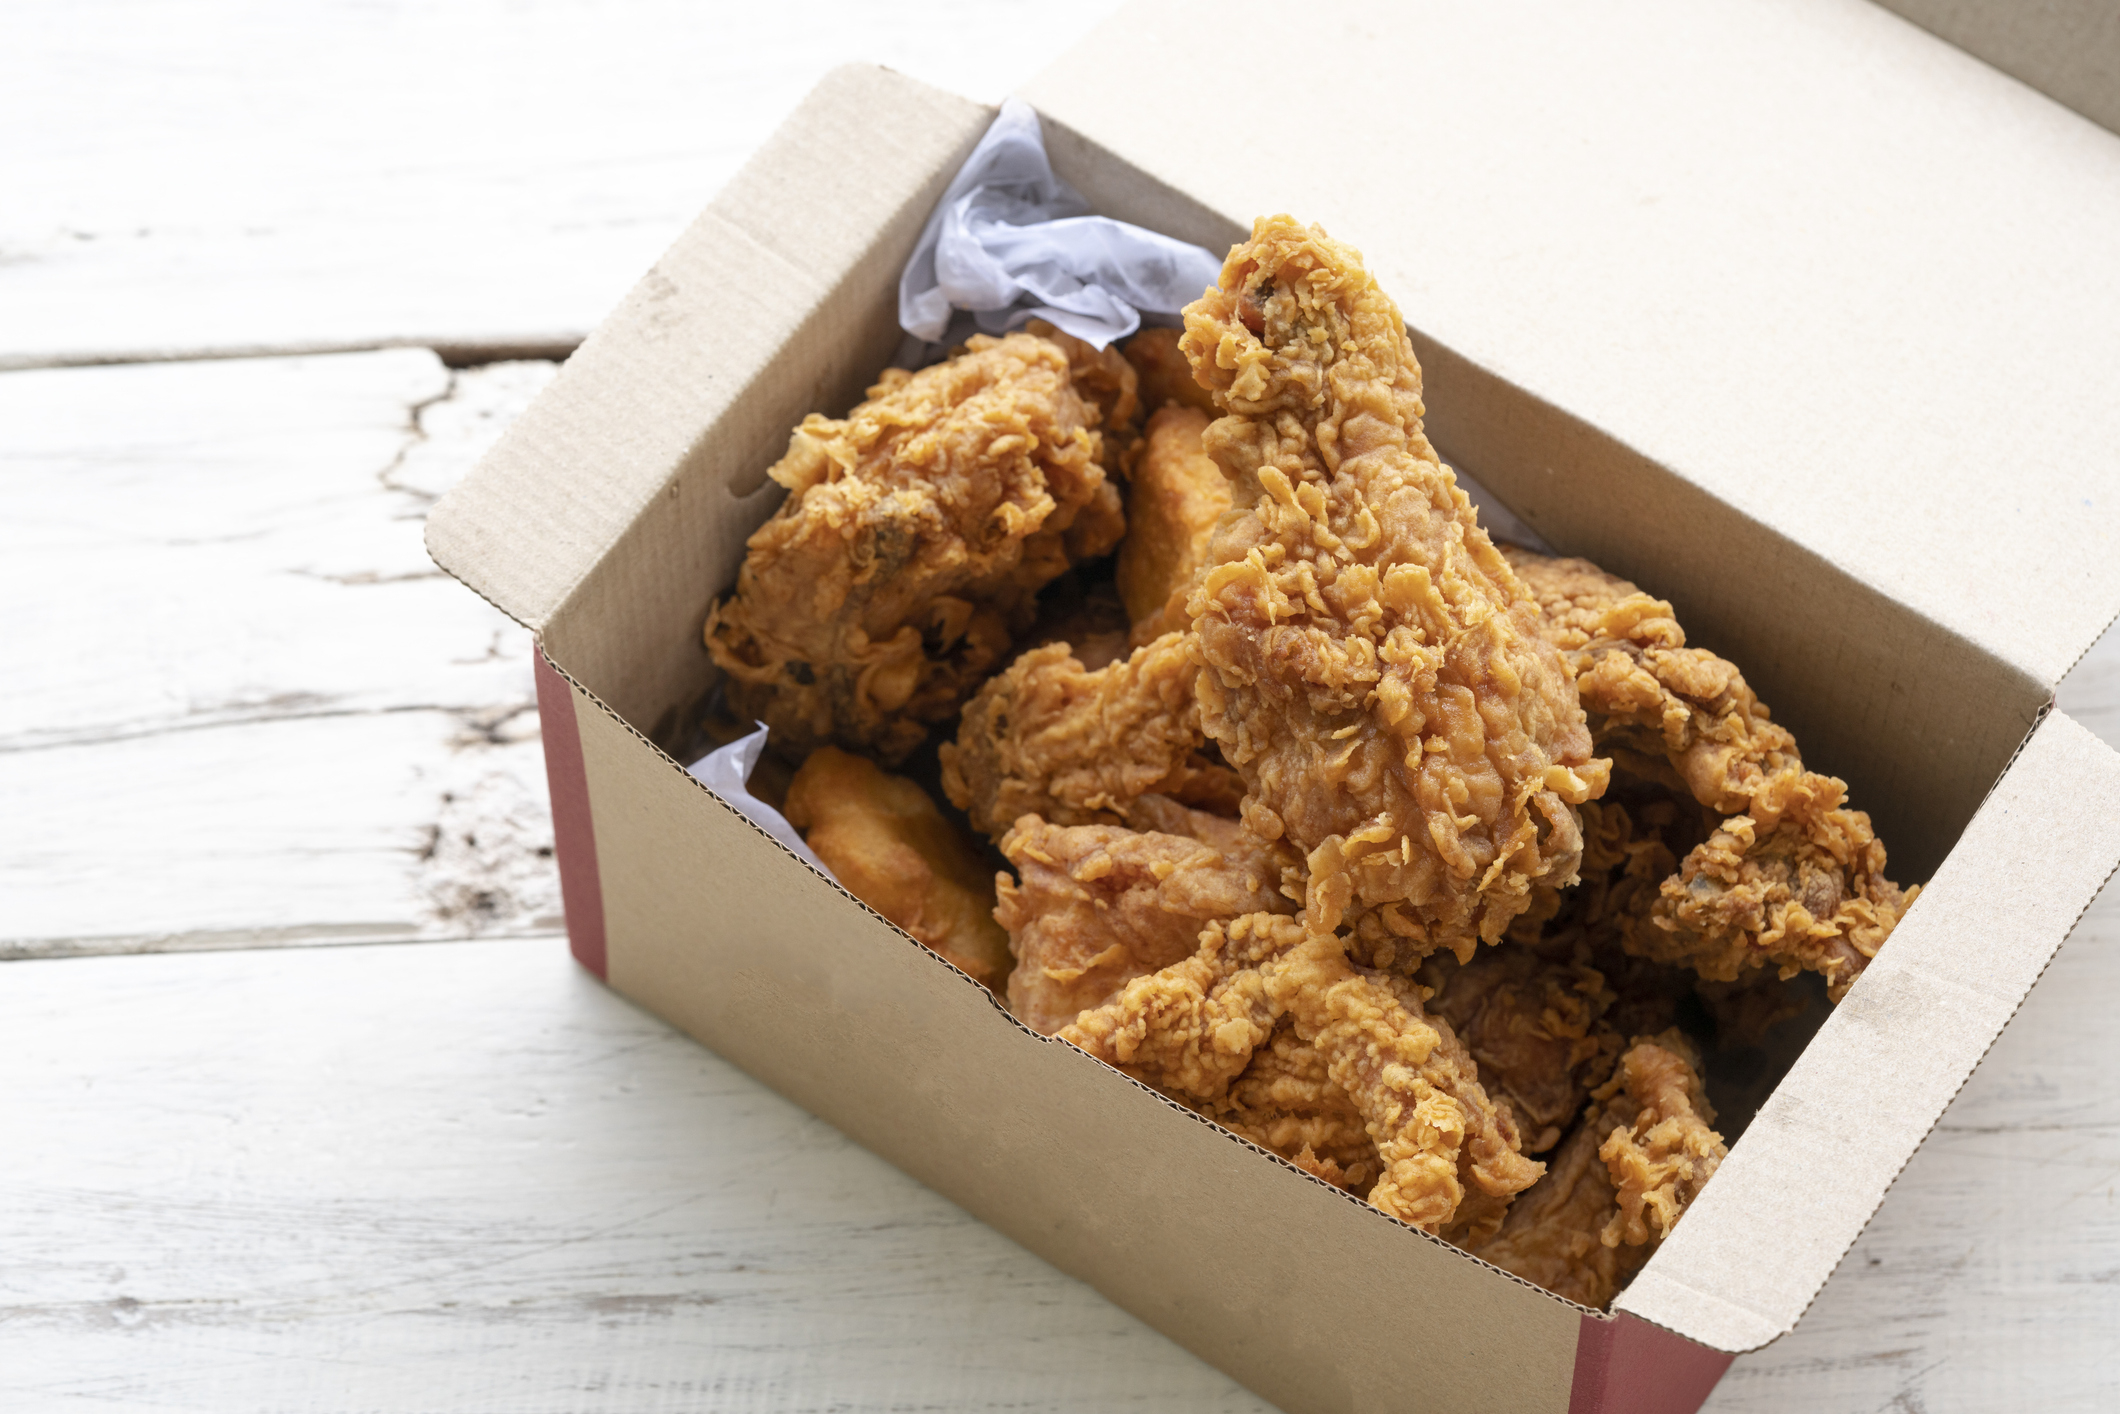 Open takeout box filled with pieces of fried chicken on a table, relevant for discussions on family meals or fast food options